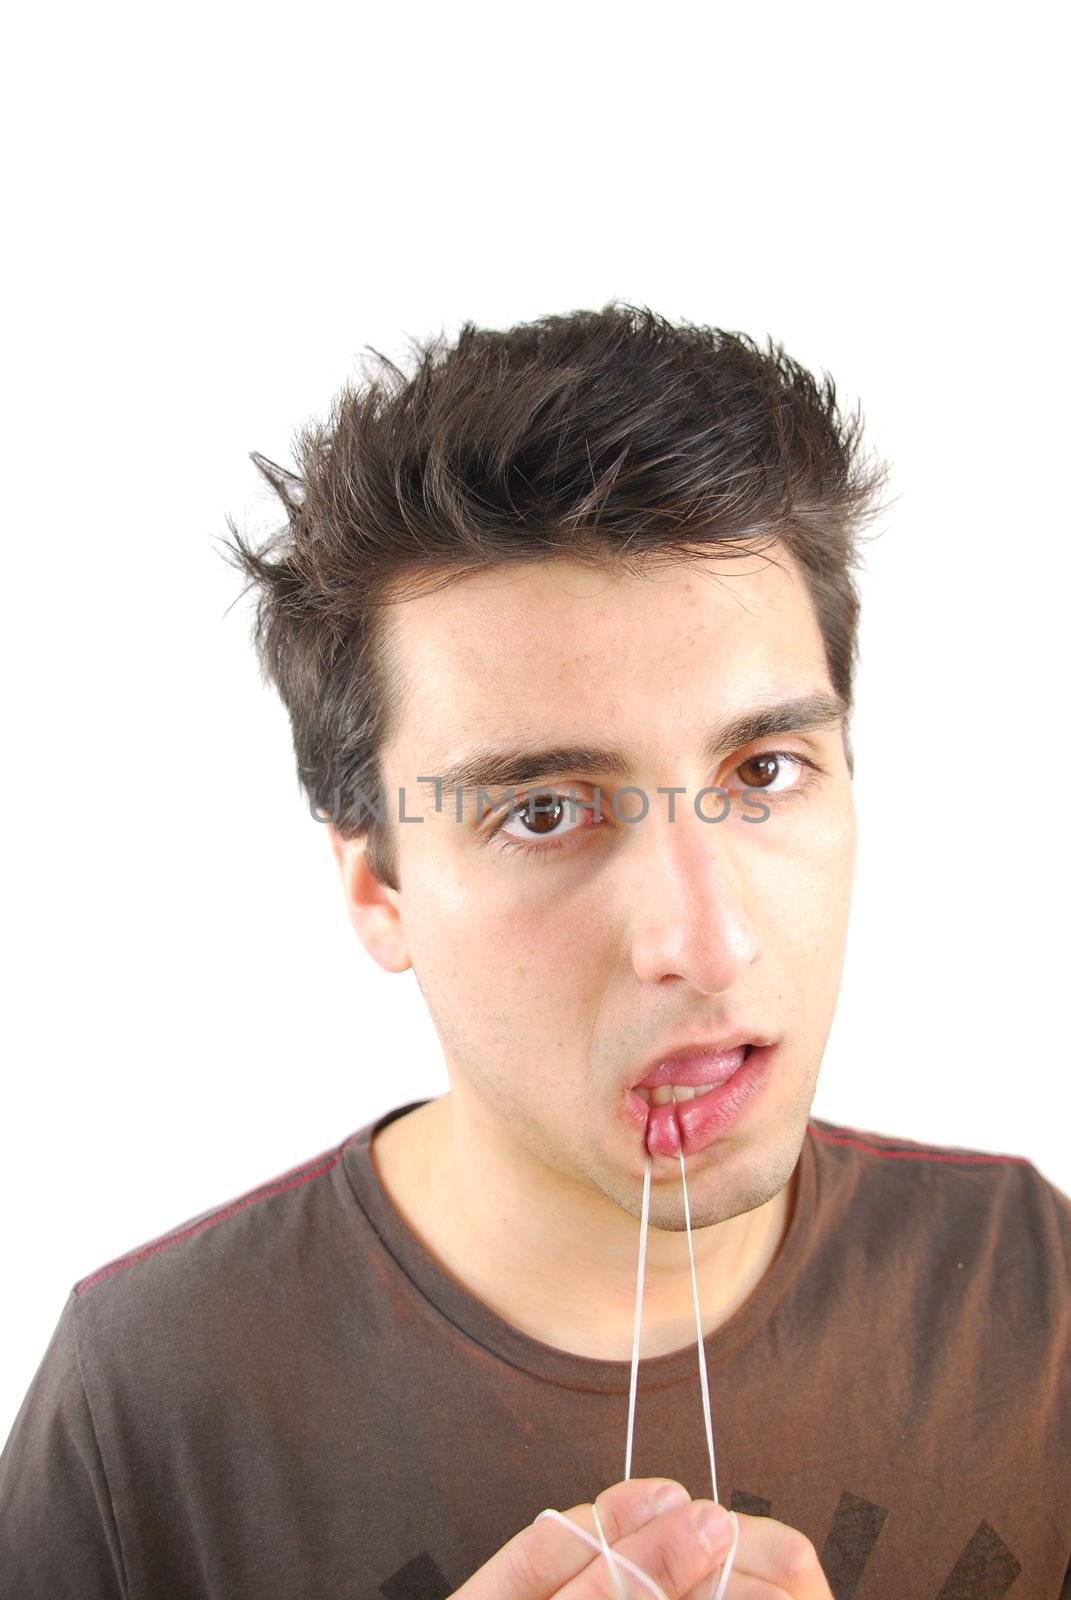 young man flossing his teeth isolated on white background